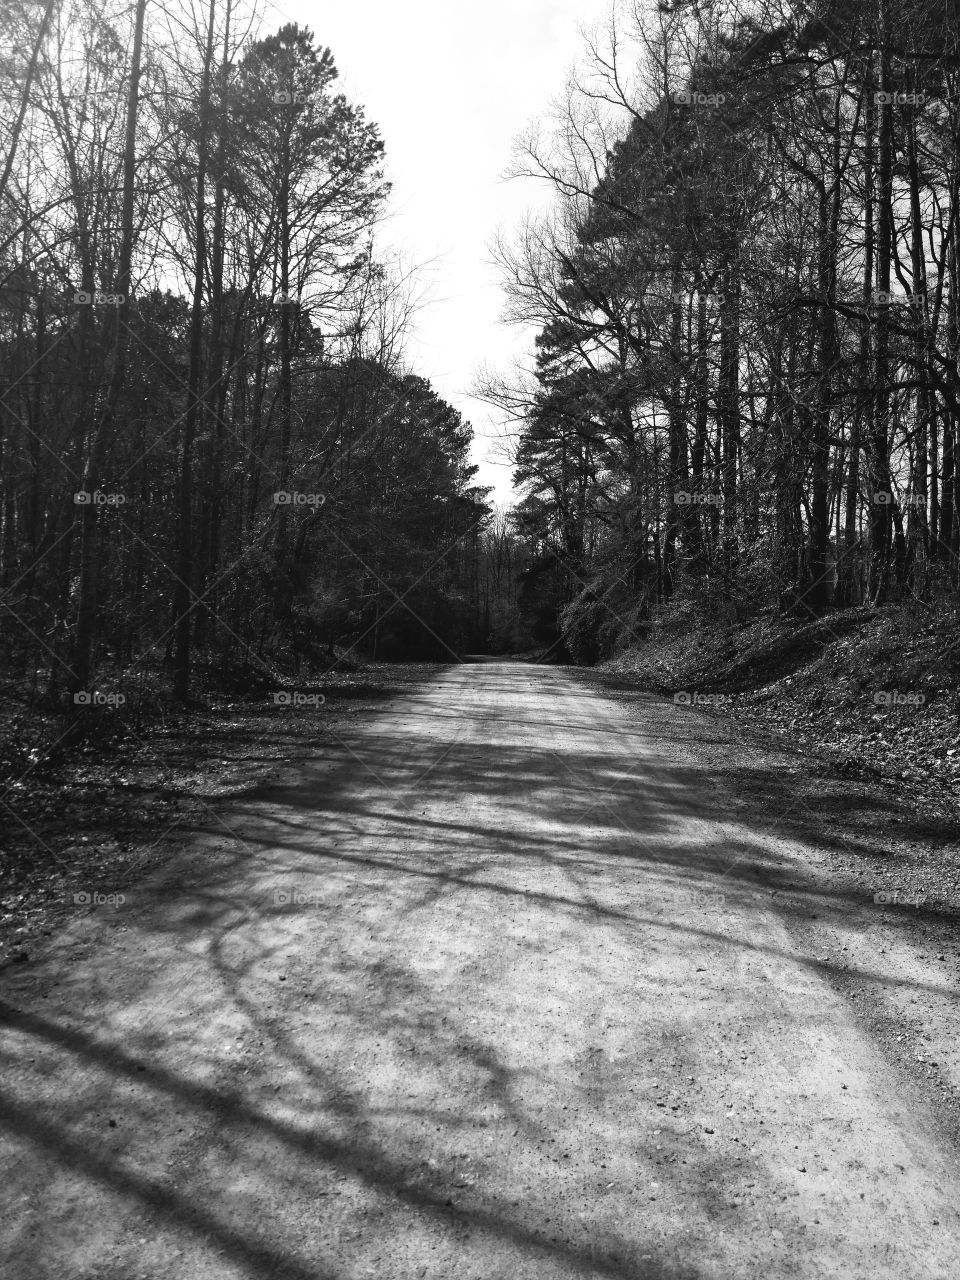 The Long Road home. Black and White